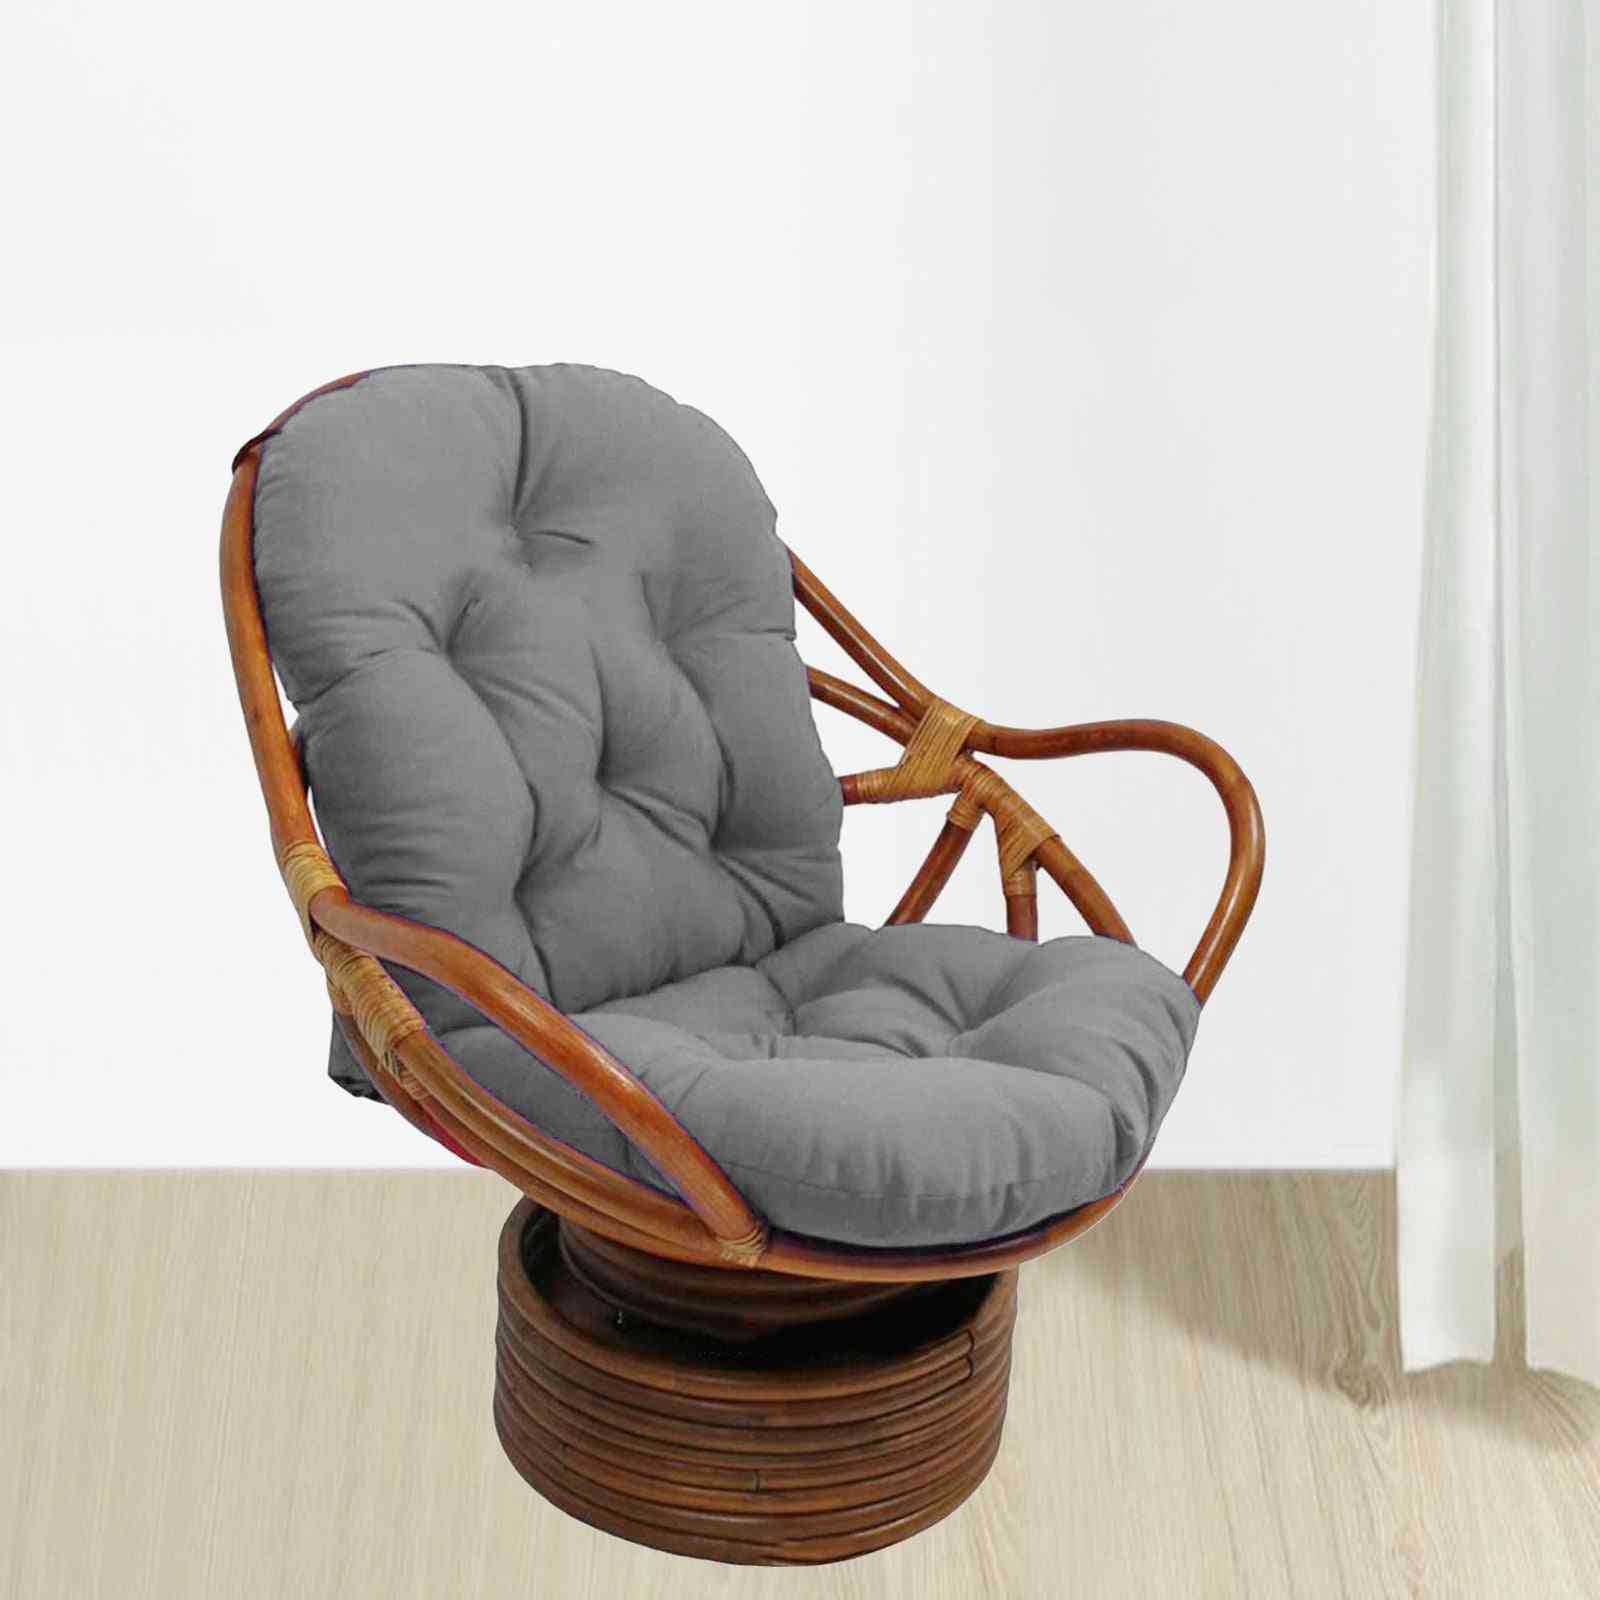 Swivel Rocker Cushion For Outdoor Garden Chair (without Chair)